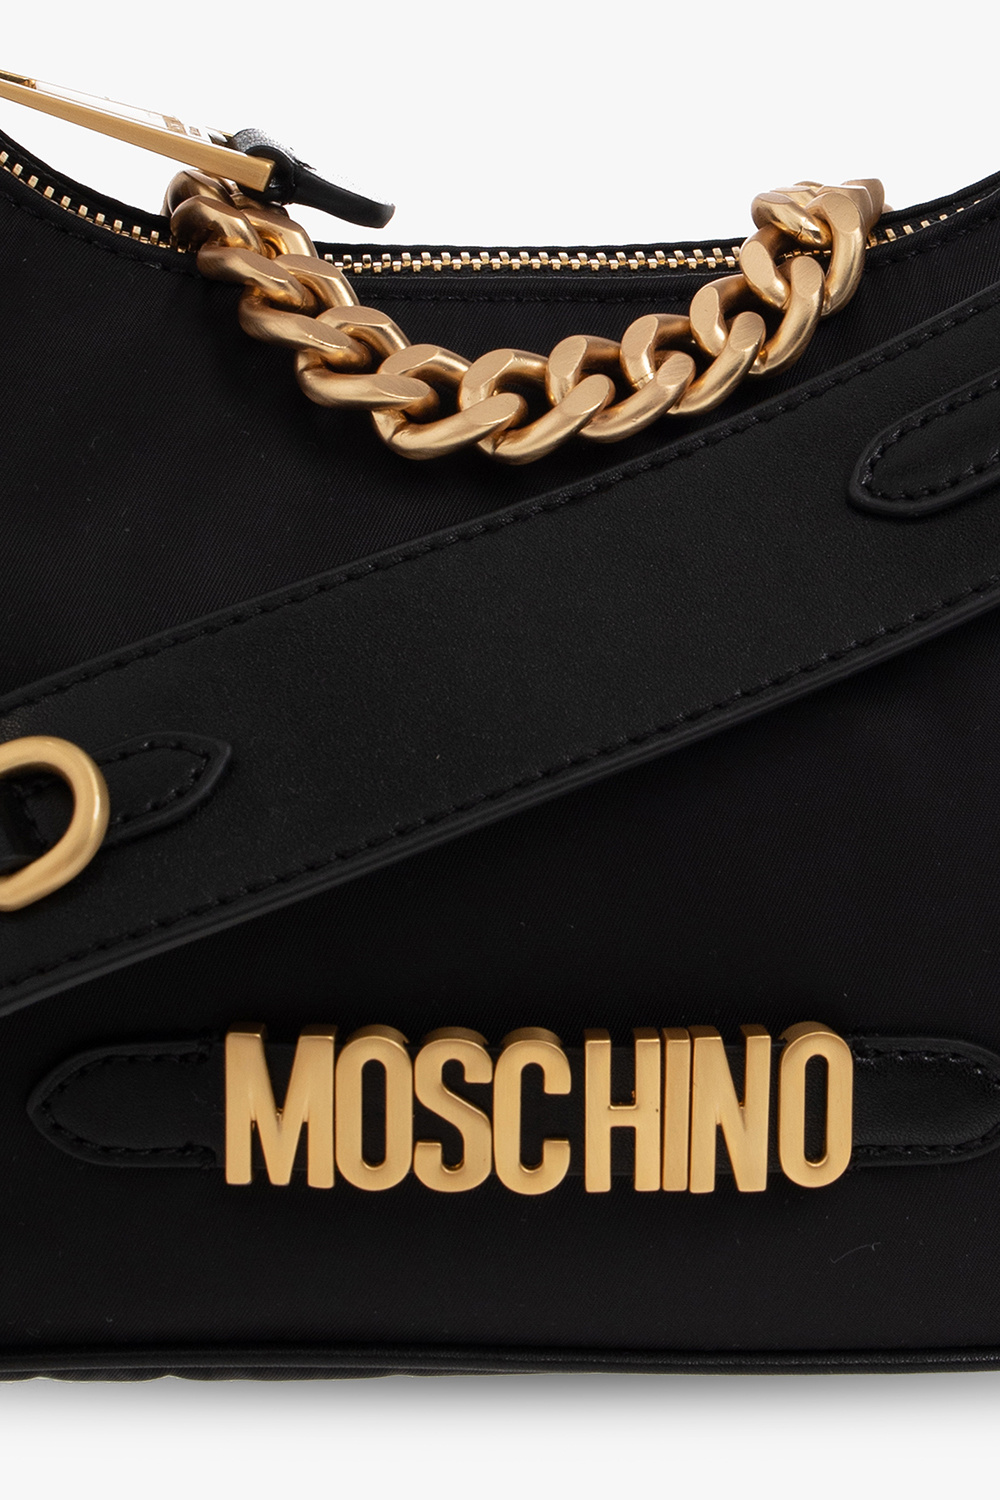 Moschino see by chloe tilda whipstitched tote bag item